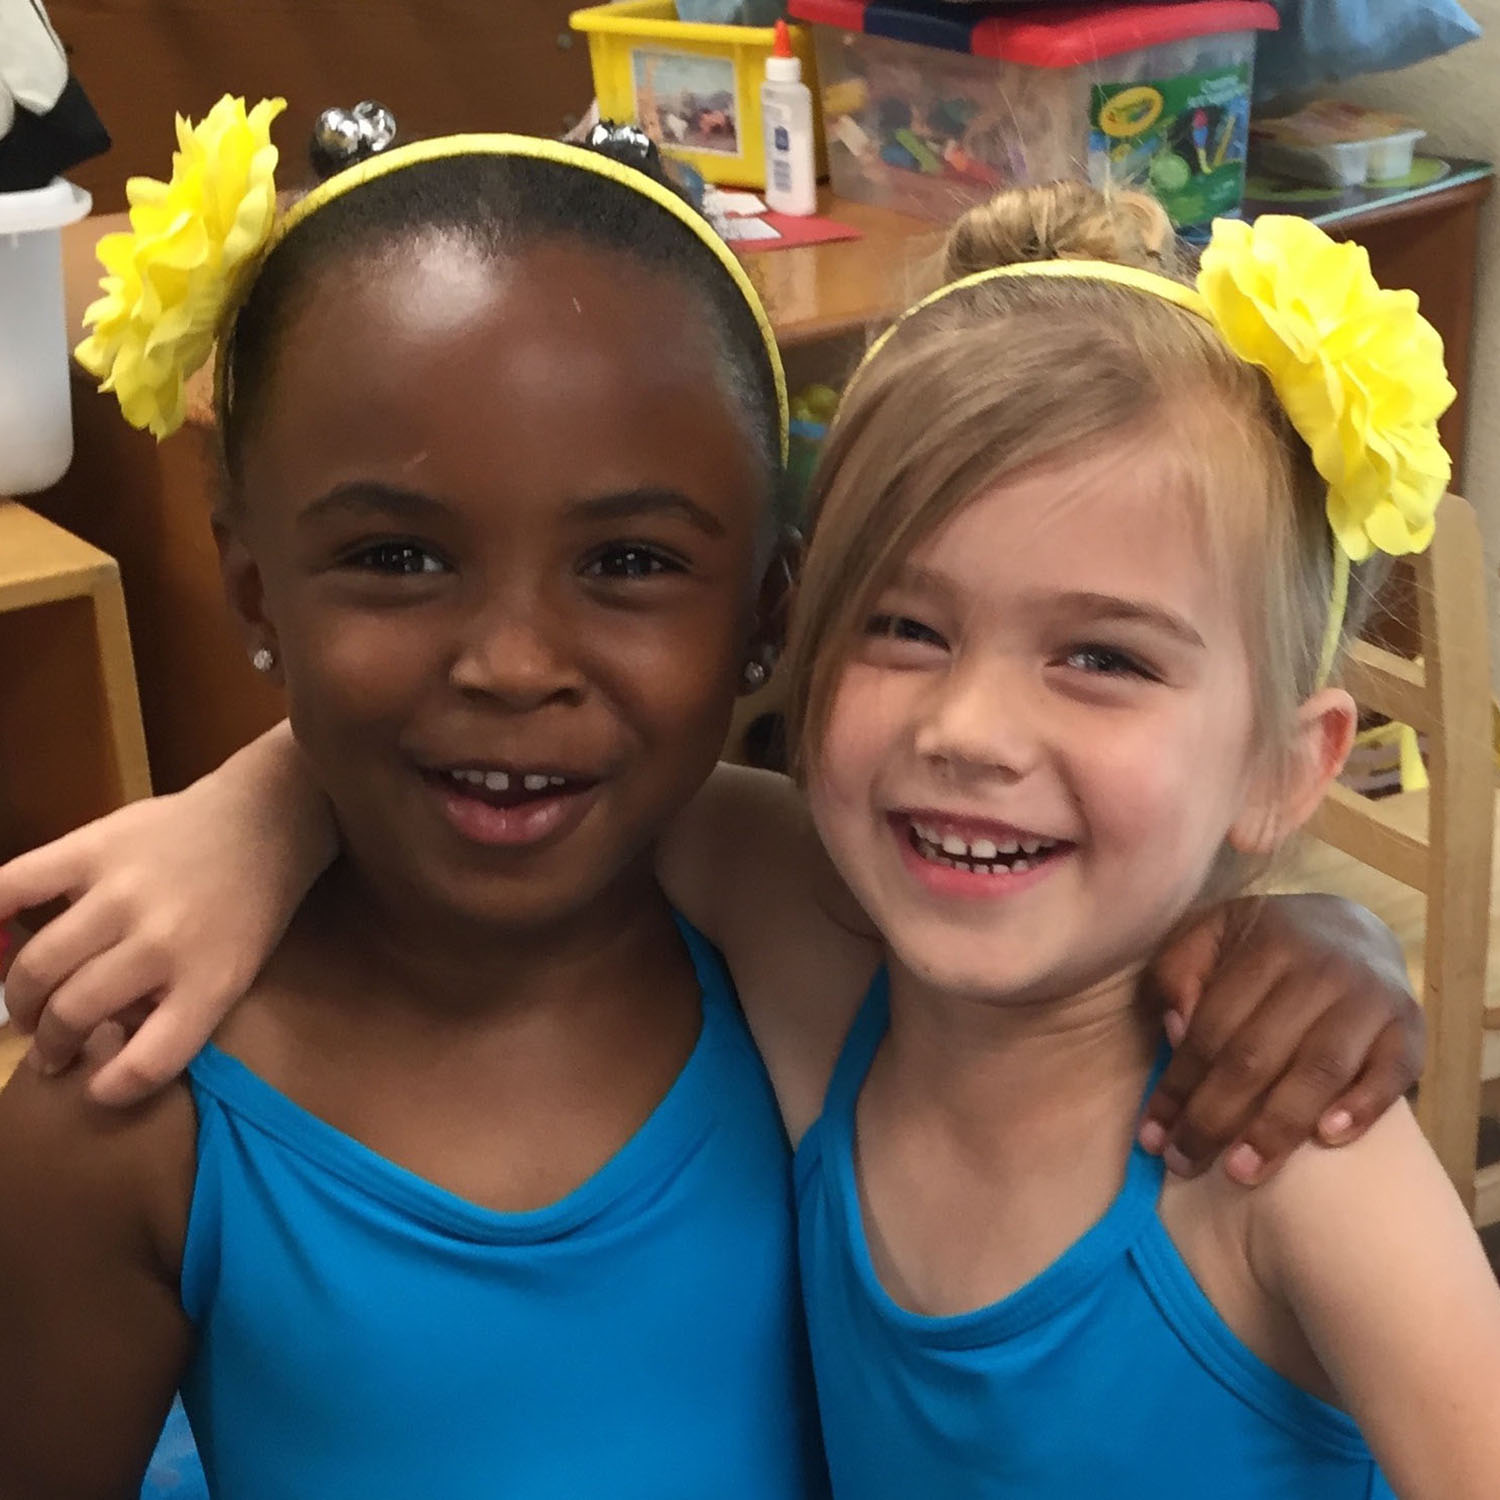 Two girls with matching headbands embrace and smile